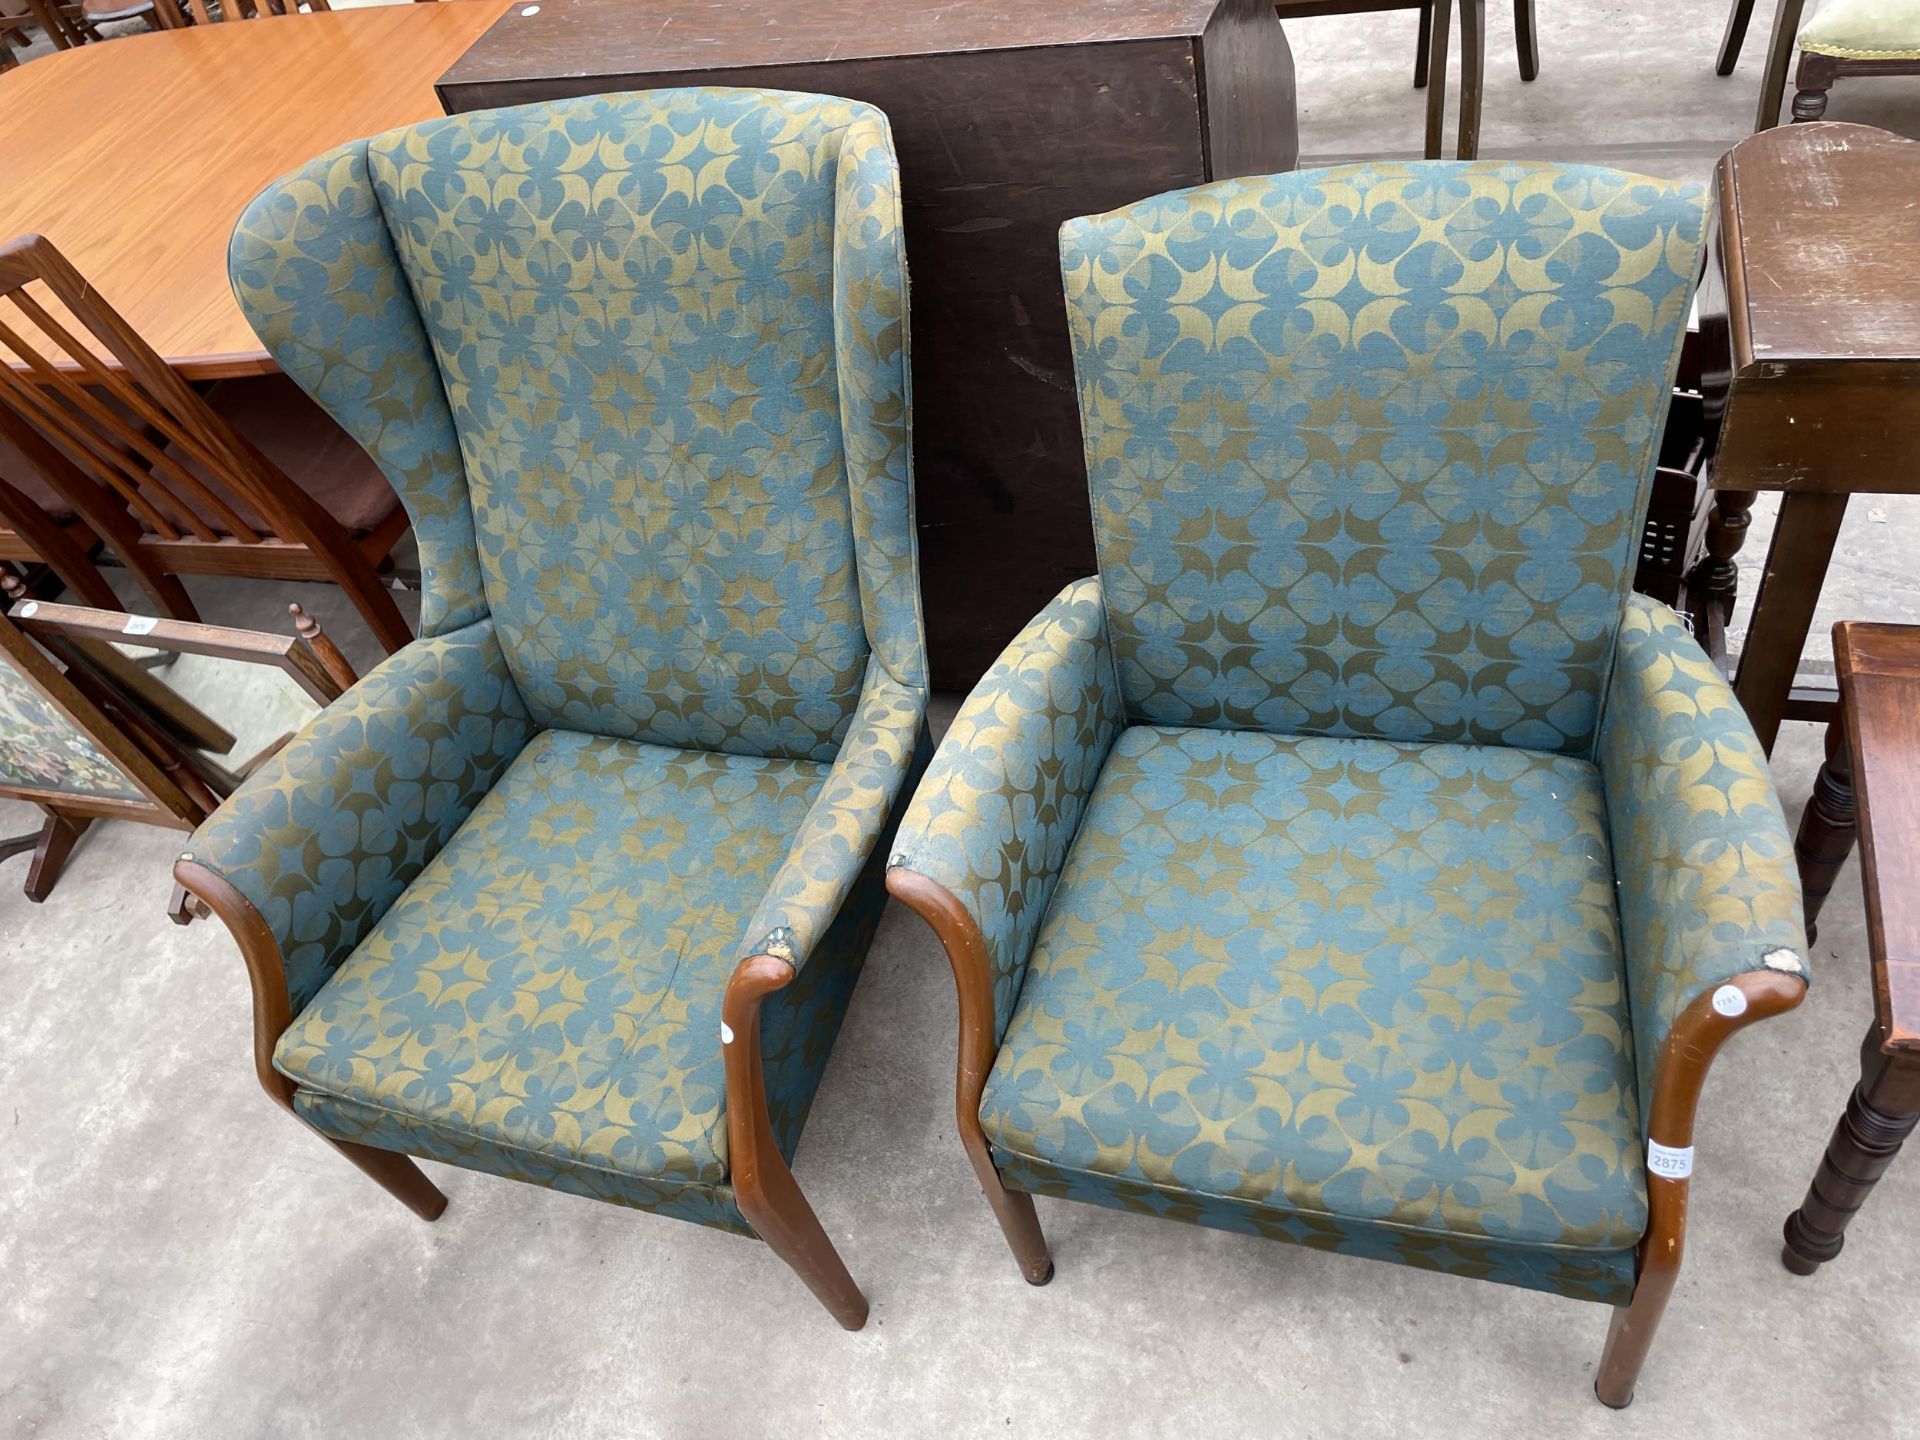 TWO PARKER KNOLL FIRESIDE CHAIRS, MODEL NO. P.K 740/1014